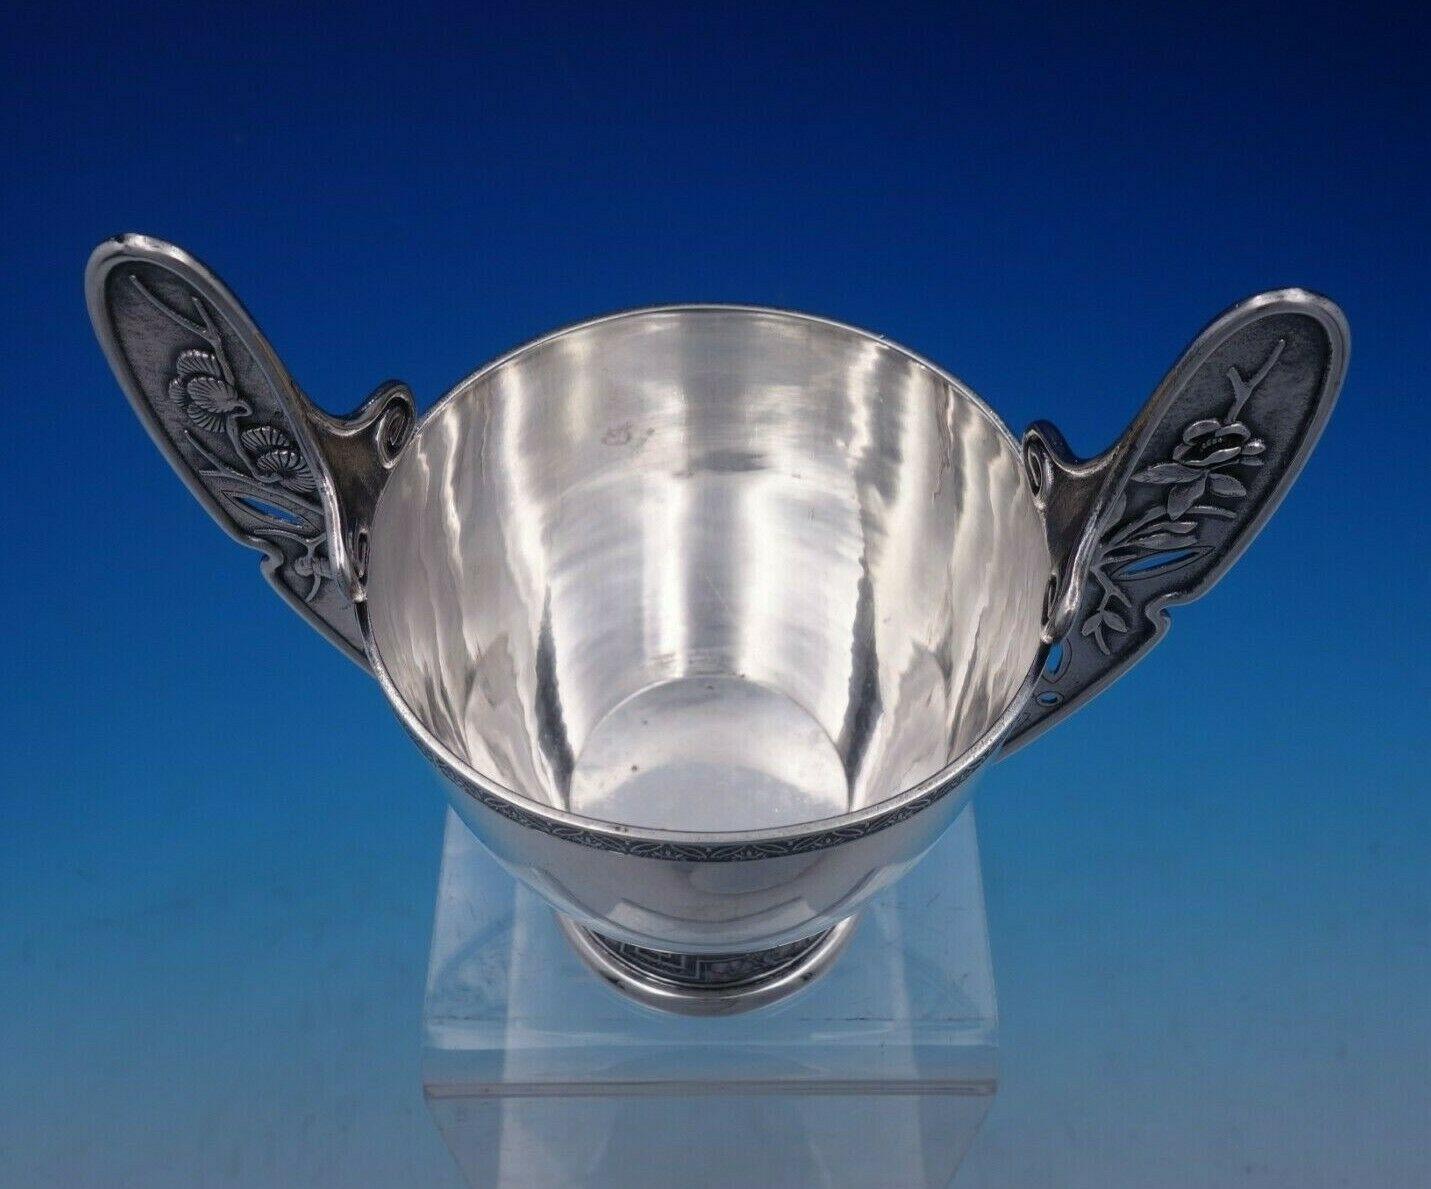 Japanese by Tiffany & Co Sterling Silver Sugar Bowl with Wings #3205M9248 2